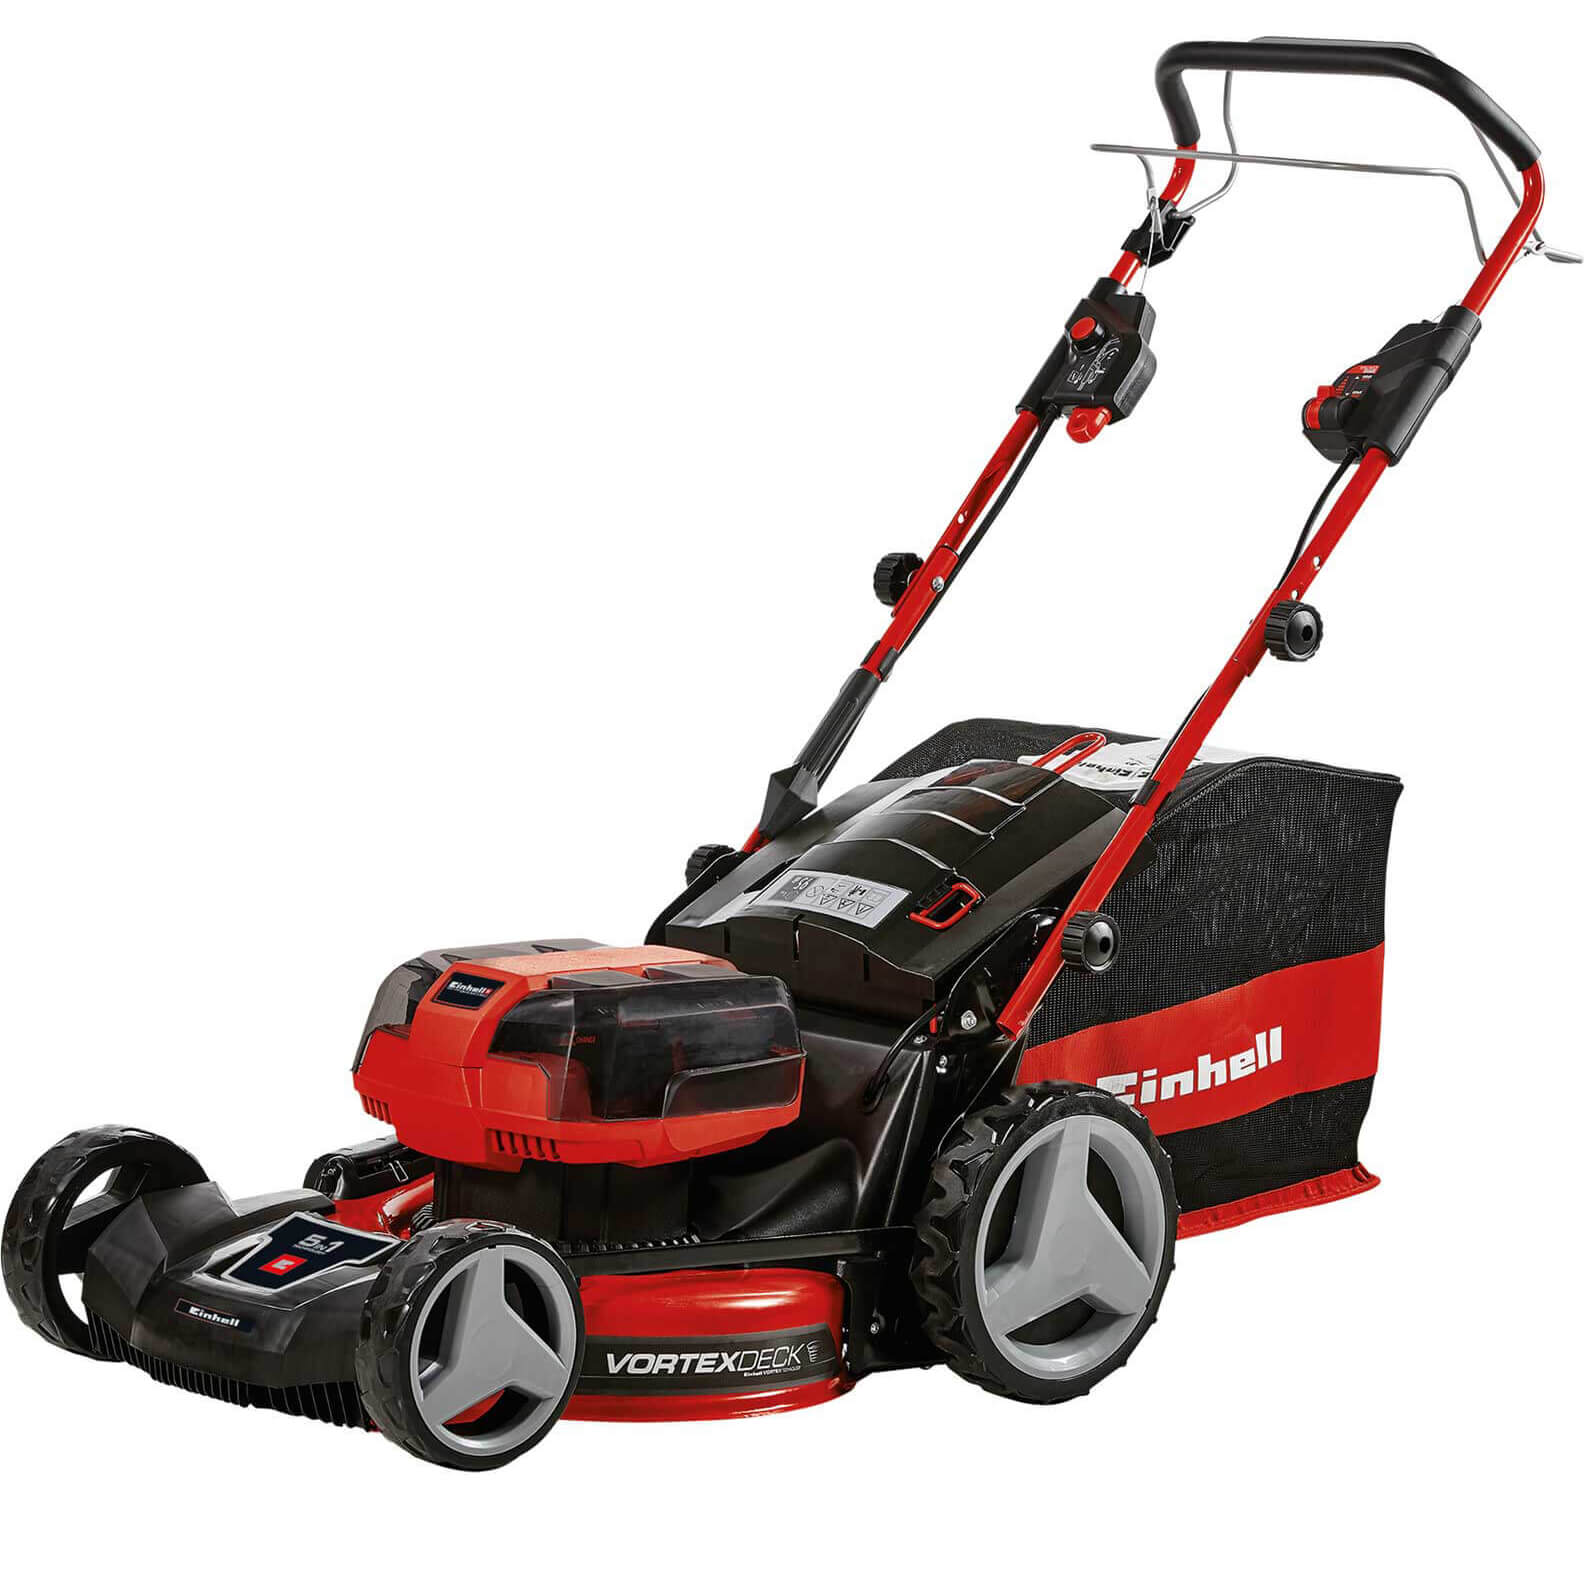 Einhell GE-CM 36/47 S HW Li 36v Cordless Brushless Self Propelled Lawnmower 470mm (Uses 2 or 4 x 18v) No Batteries No Charger